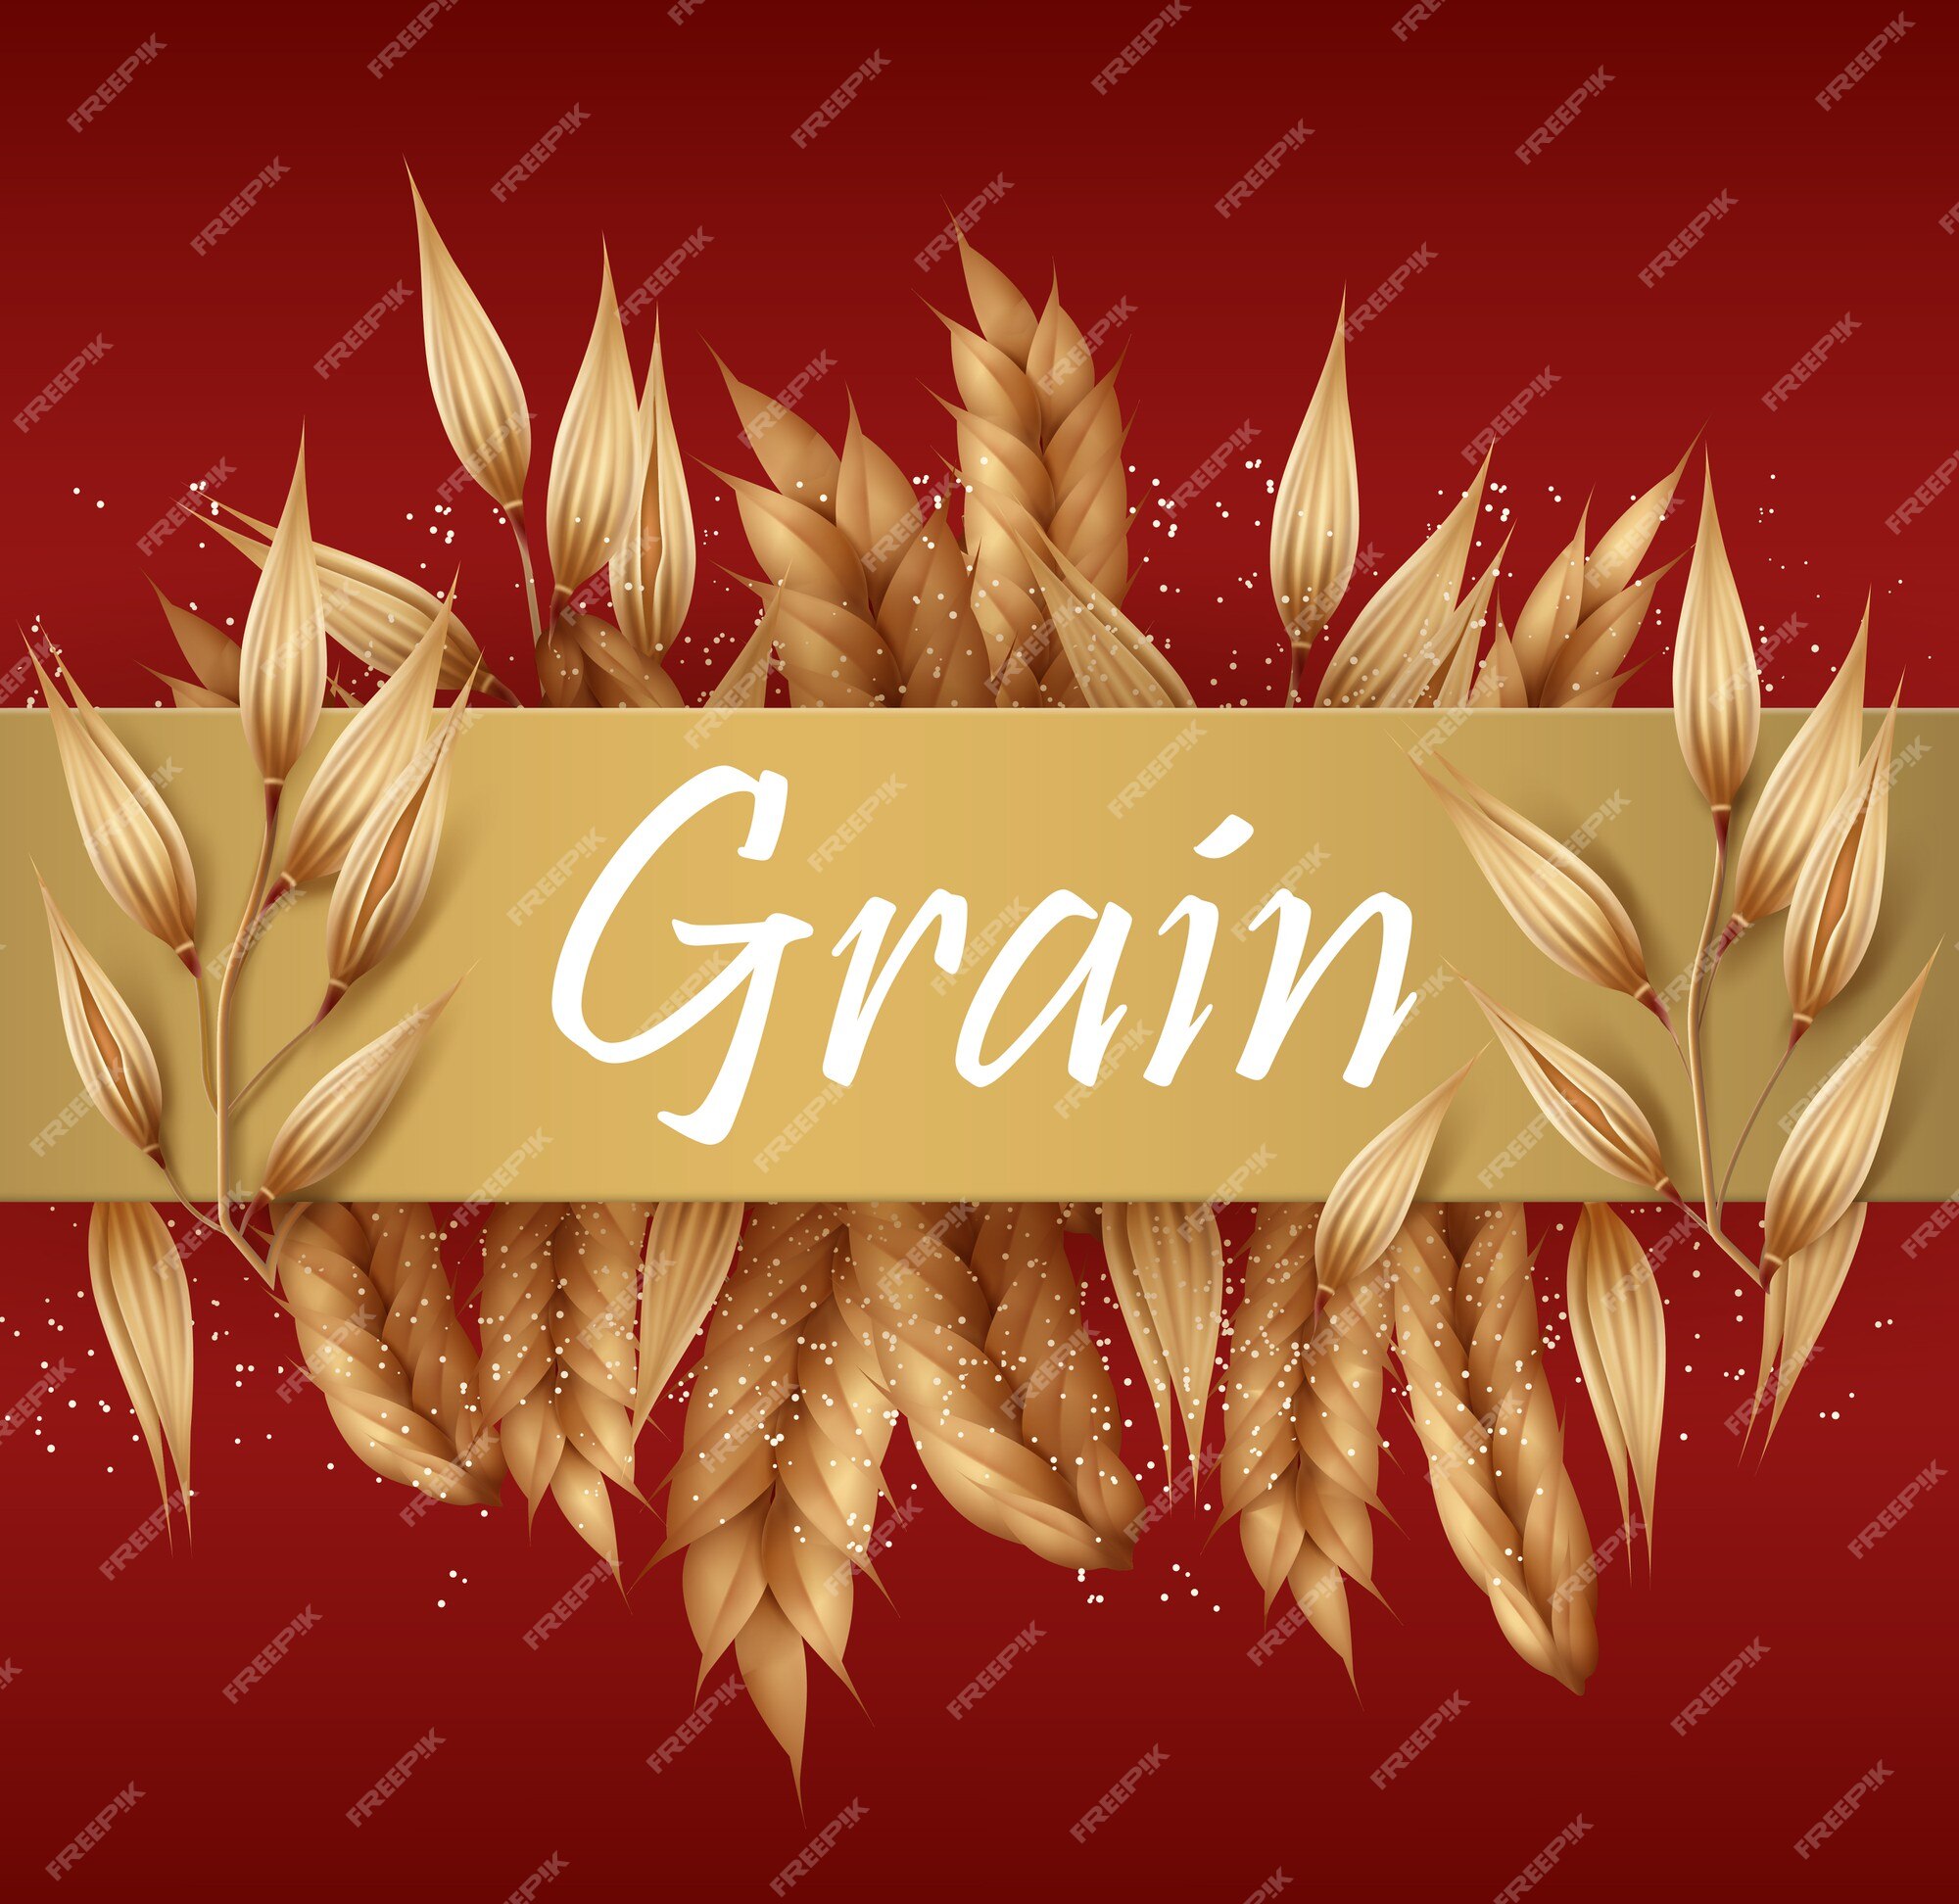 Premium Vector | Cereals grains and spikelets or ears wheat, barley, oat  and rye with golden banner for text isolated on red background